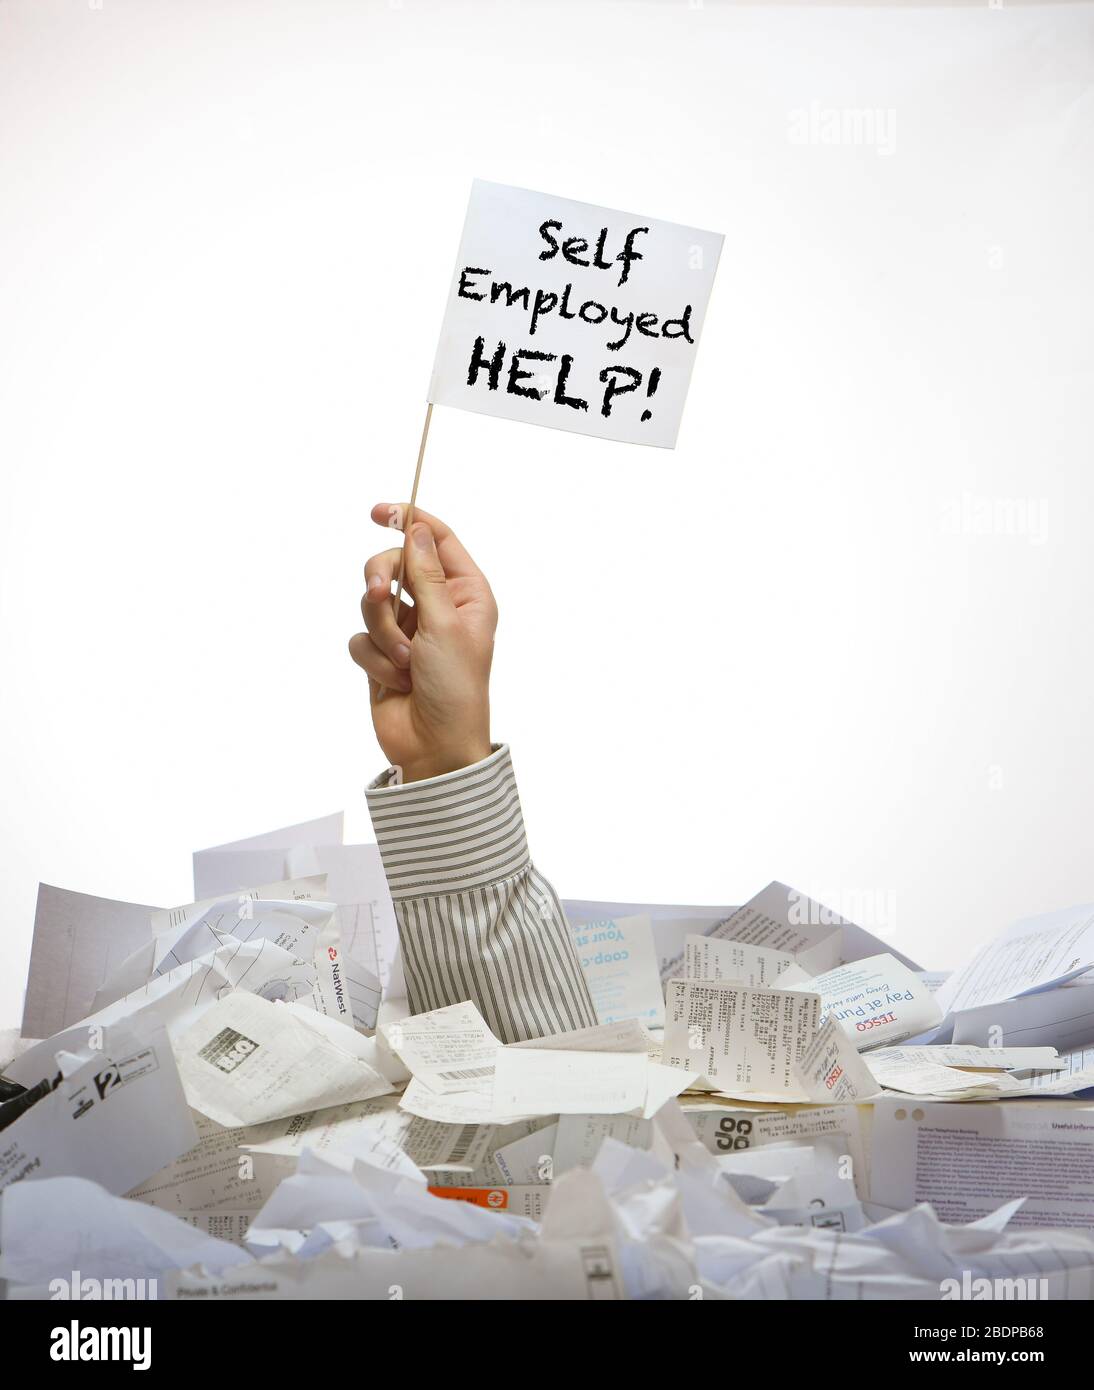 Concept image of a arm pushing up through a pile of receipts with a white flag with self employed message on it under business pressure from Covid-19 Stock Photo